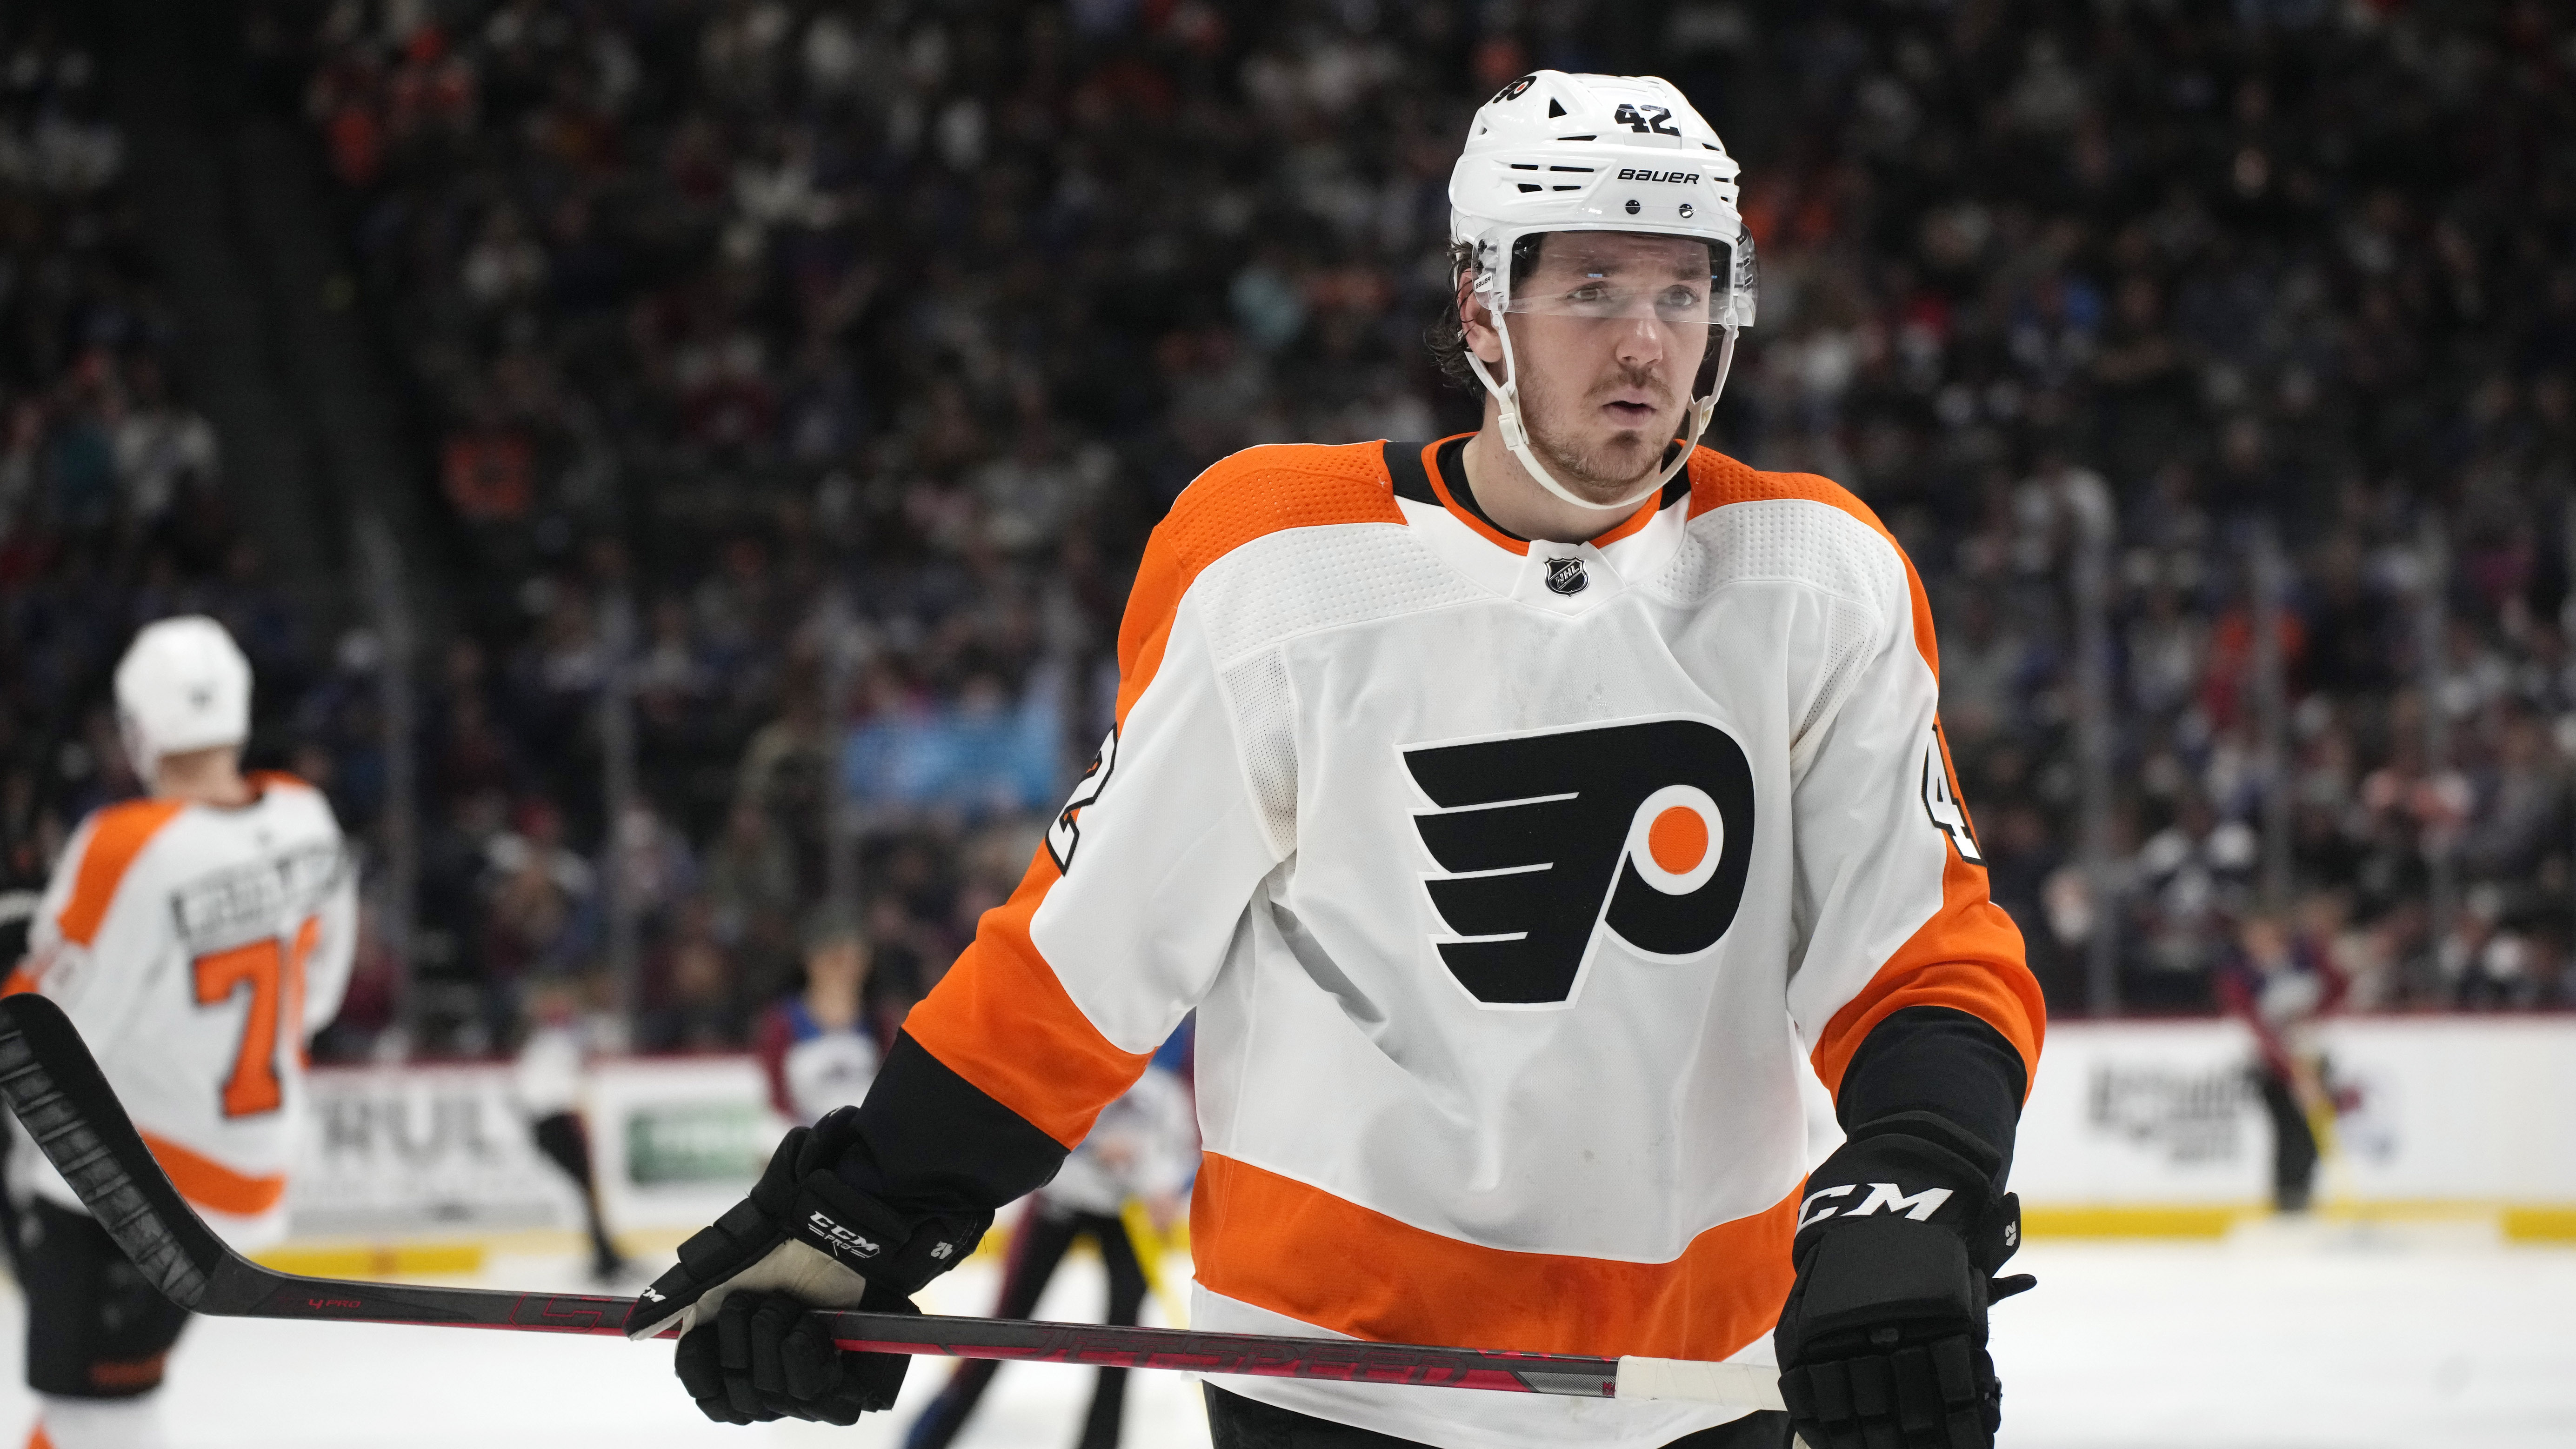 Flyers Hayden Hodgson has taken the long route to reach the NHL